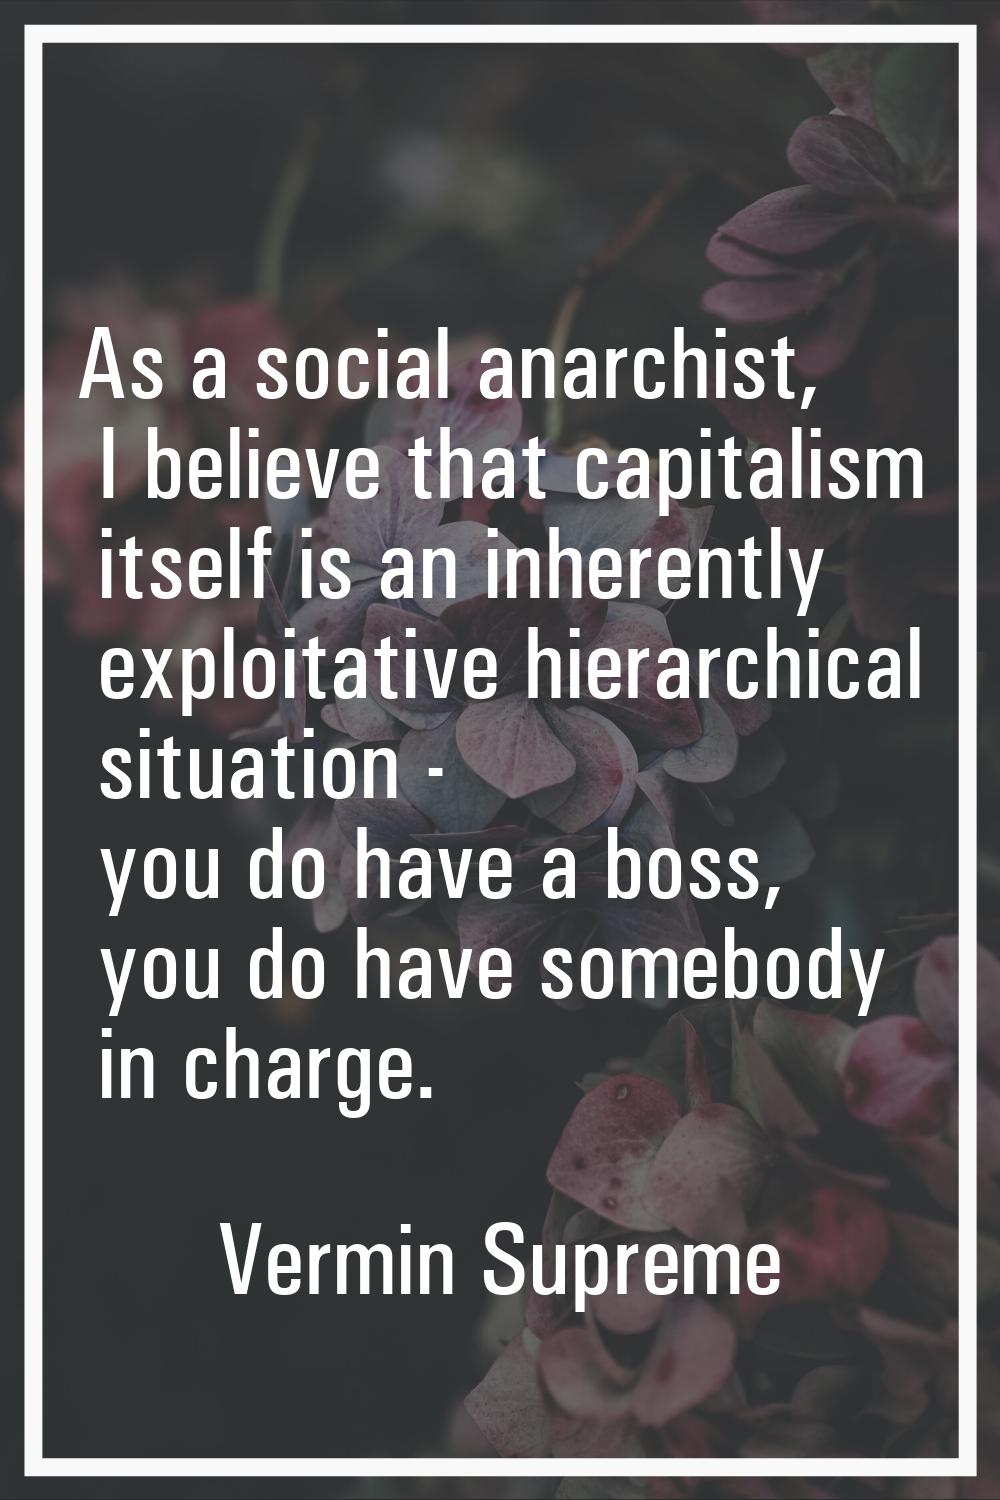 As a social anarchist, I believe that capitalism itself is an inherently exploitative hierarchical 